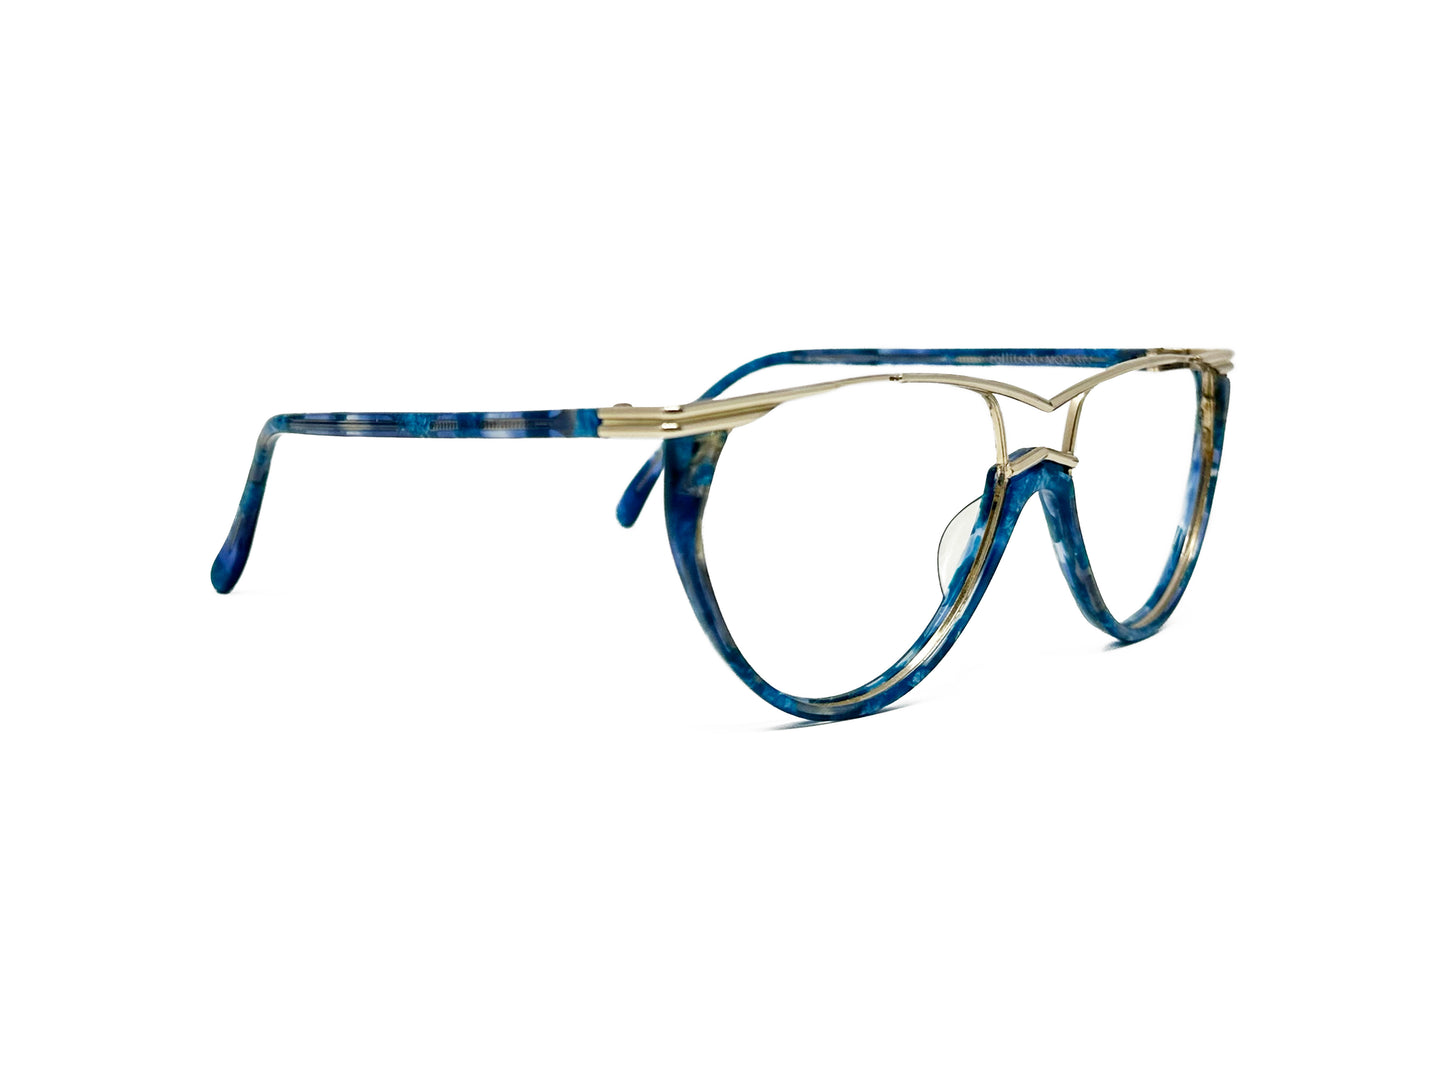 Zollitsch nautical style, metal, optical frame with rounded bottom and flat-top with curved dip above bridge. Model: 377. Color: BL - Blue swirl with gold metal flat-top. Side view.